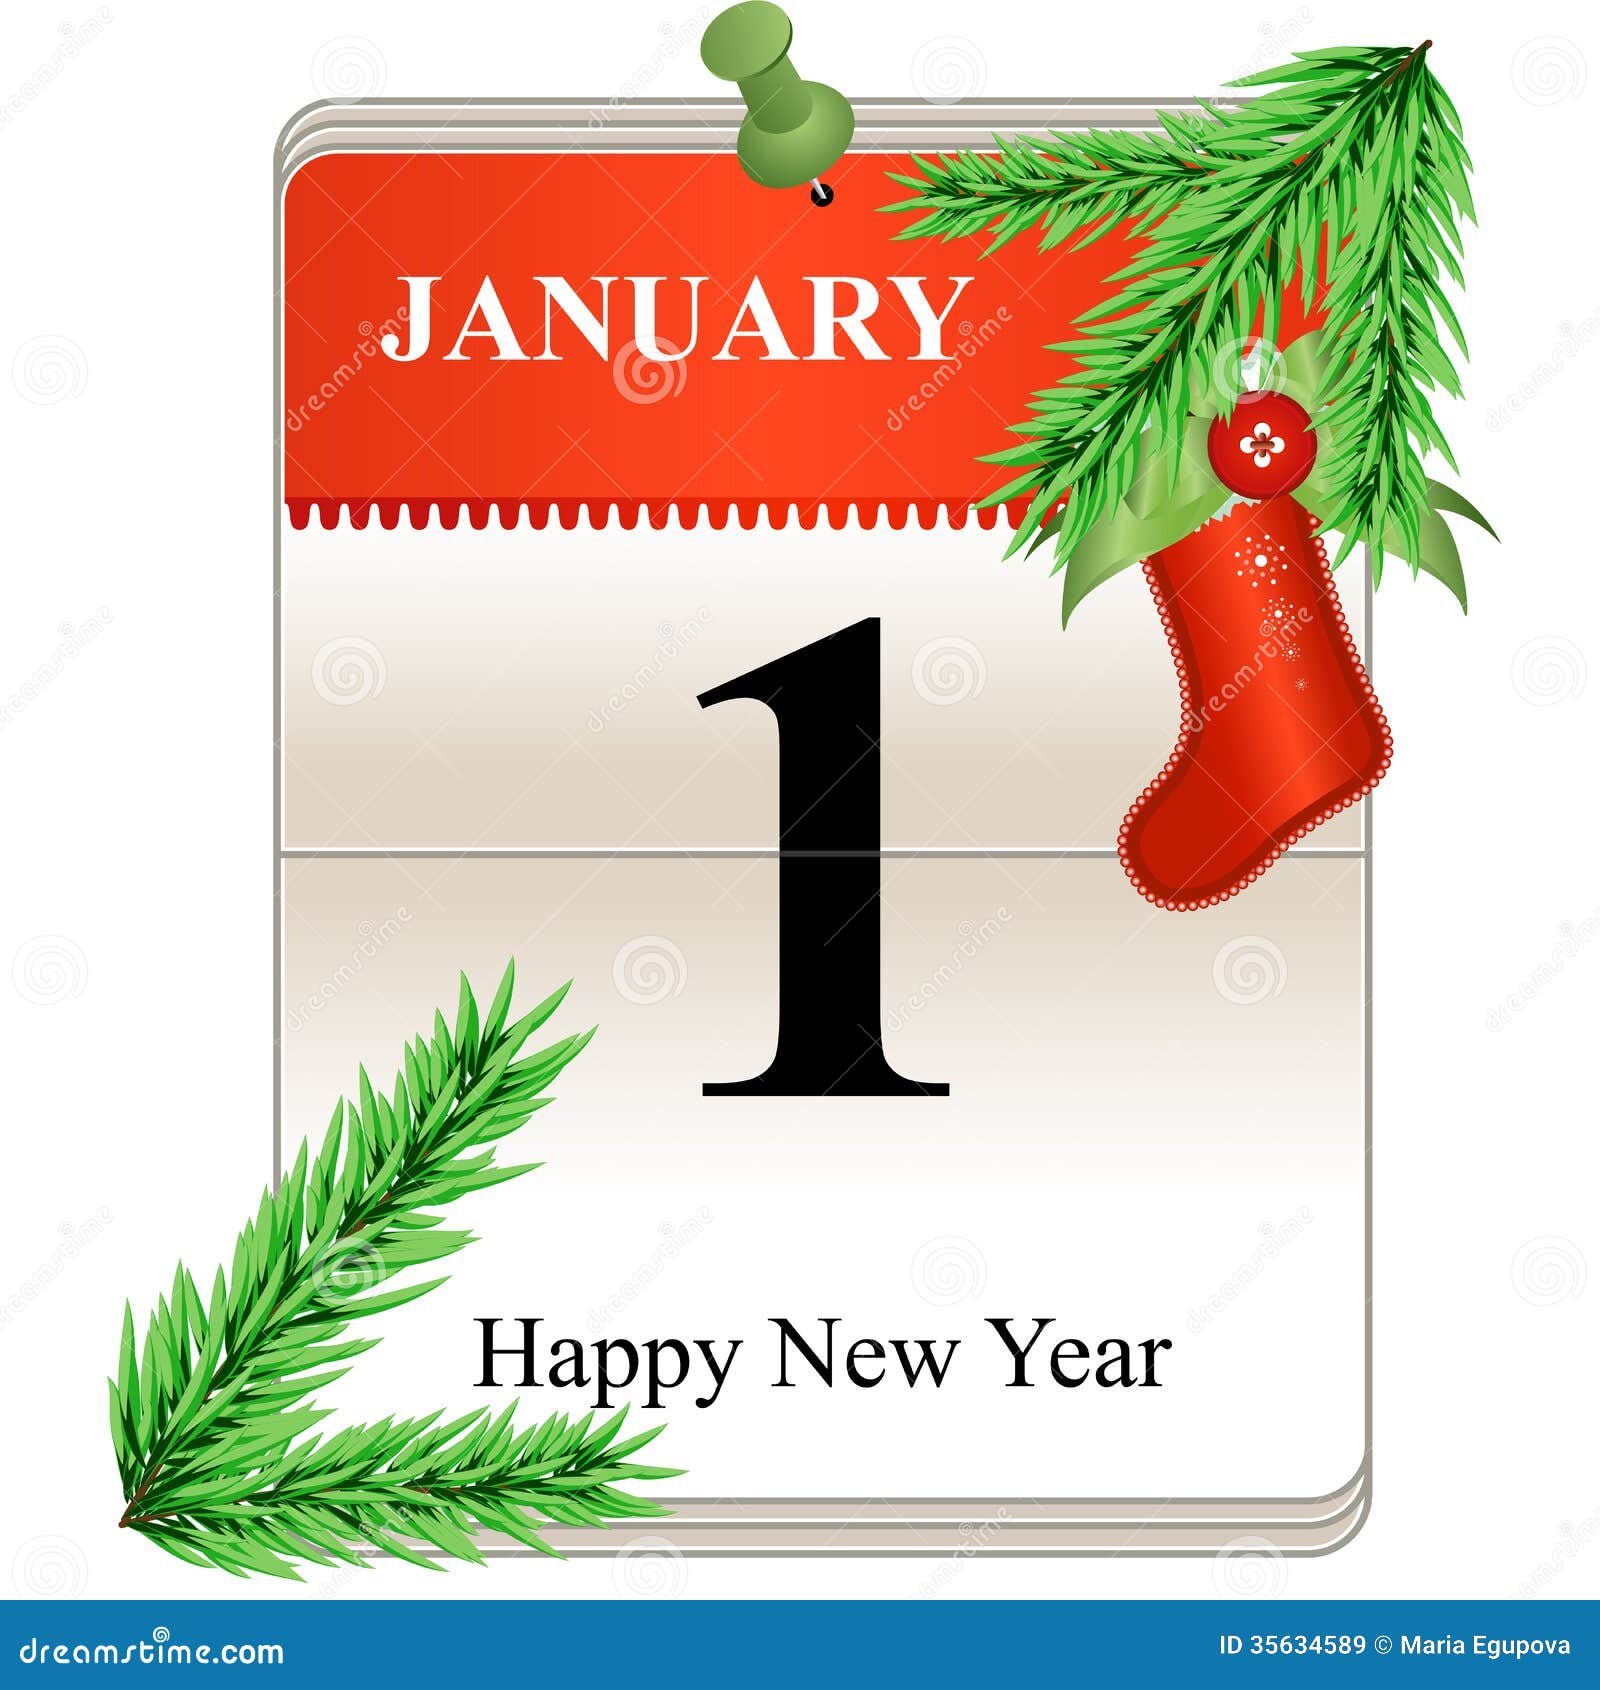 New Year Calendar Date Royalty Free Stock Images Image 35634589